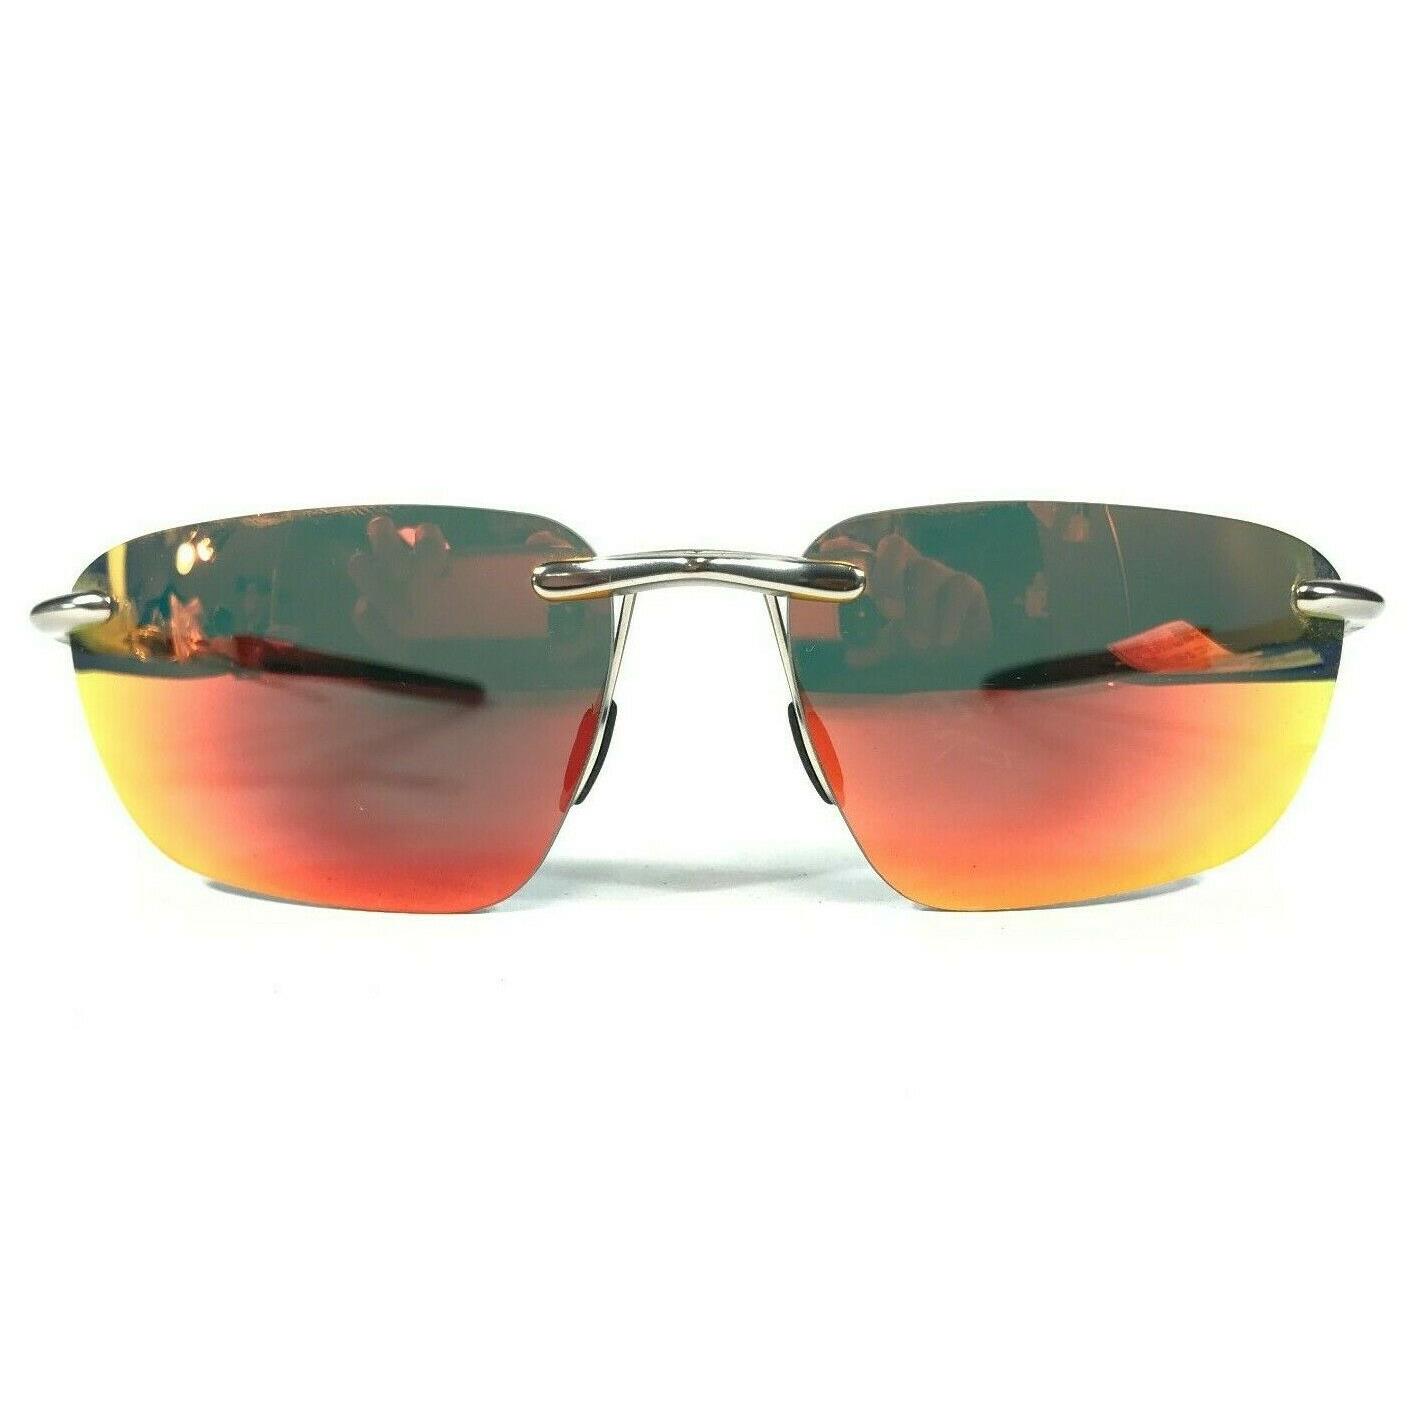 Uvex Sunglasses Sportstyle 02 Silver Wrap with Blue Orange Lenses 60-16-130